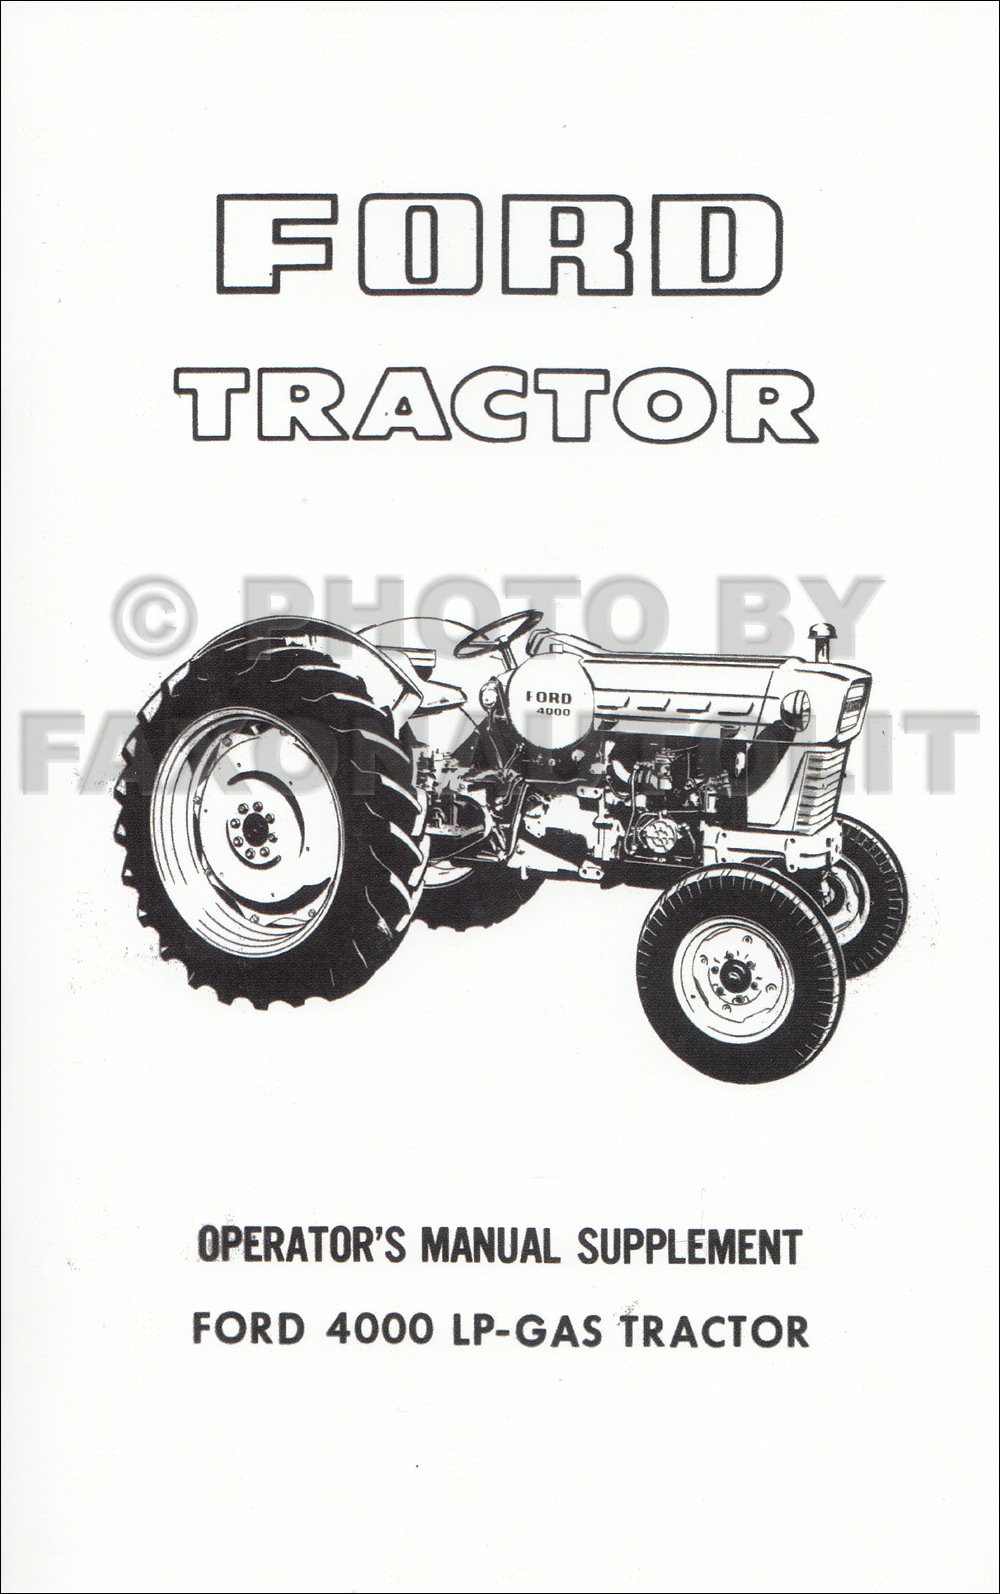 1965 1966 1967 Ford 2000-5000 Owners Manual Tractor Operators Guide Book 